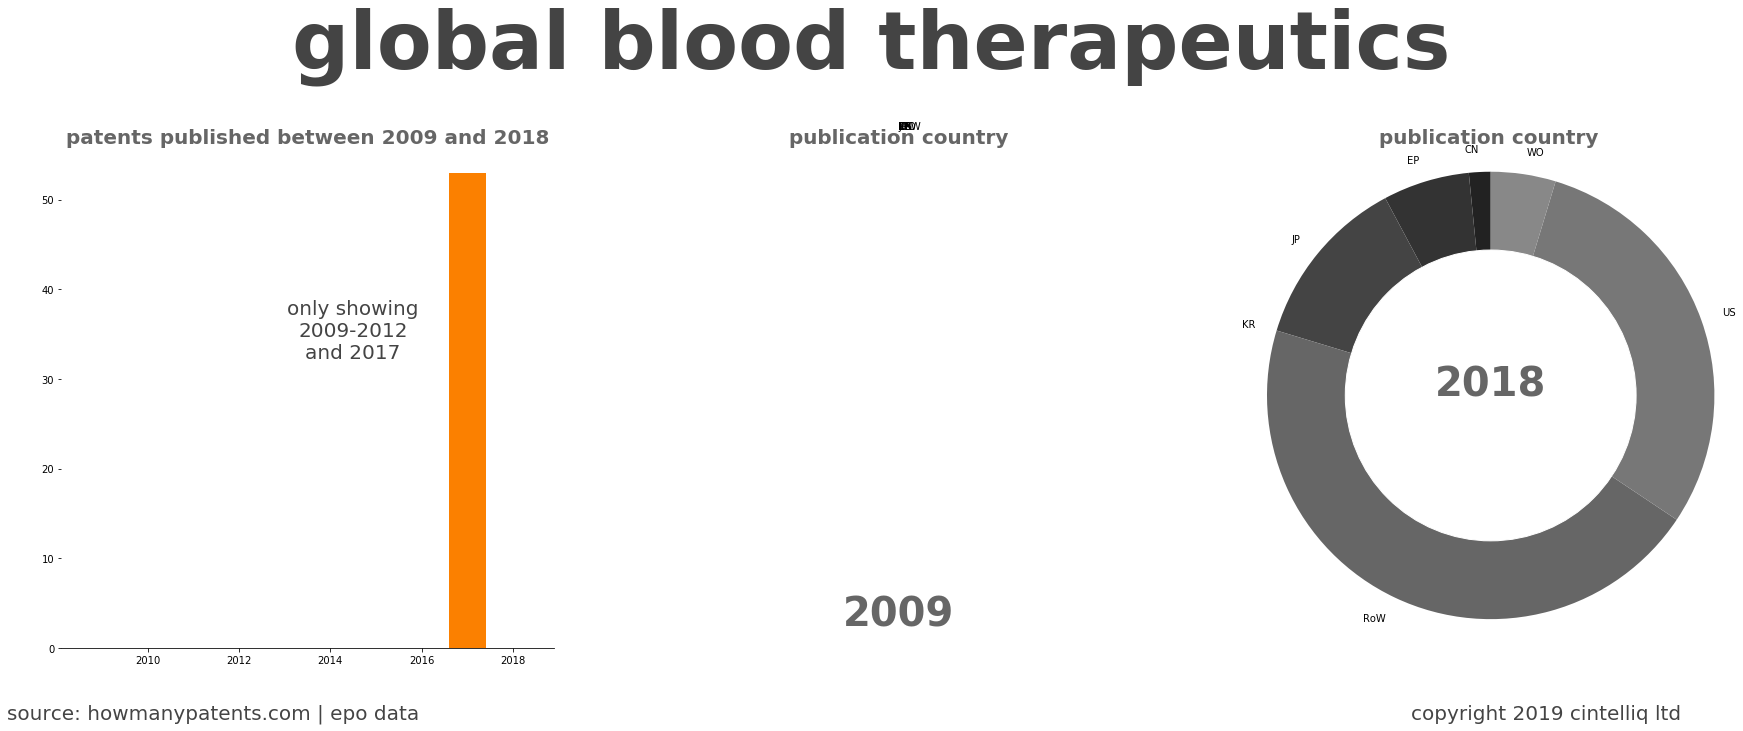 summary of patents for Global Blood Therapeutics